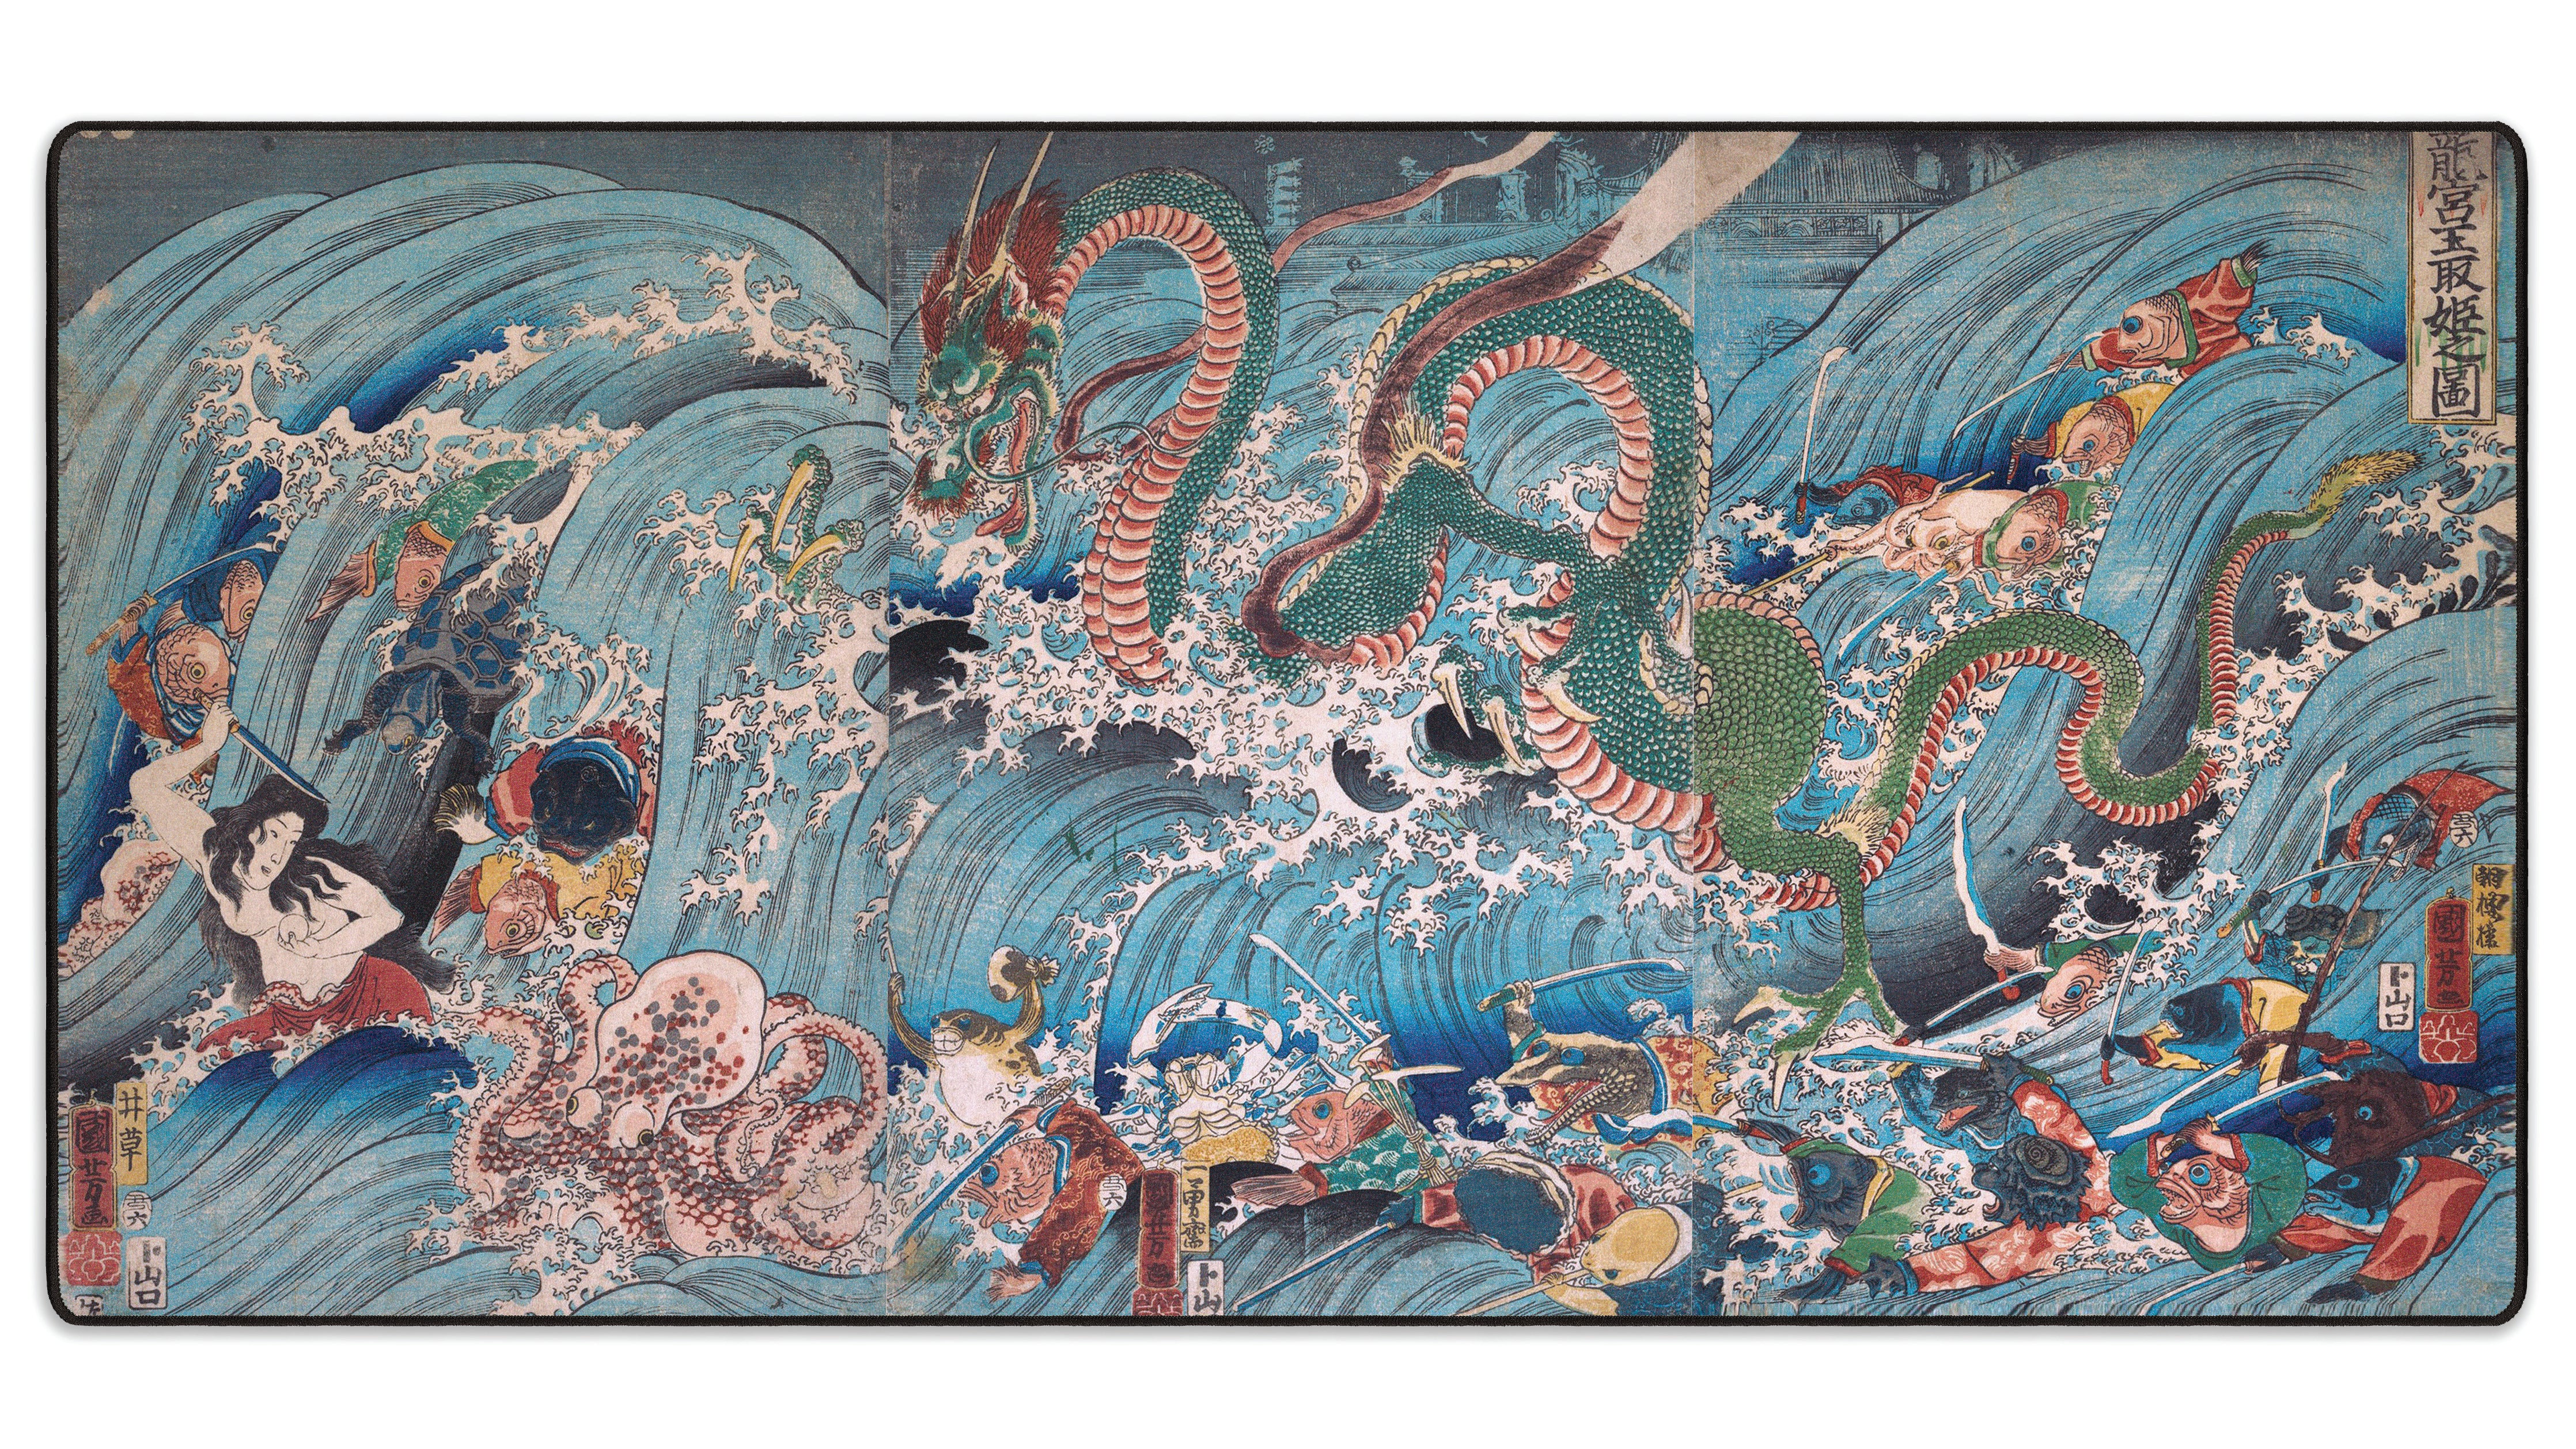 The Palace of the Dragon King, by Kuniyoshi - The Mousepad Company